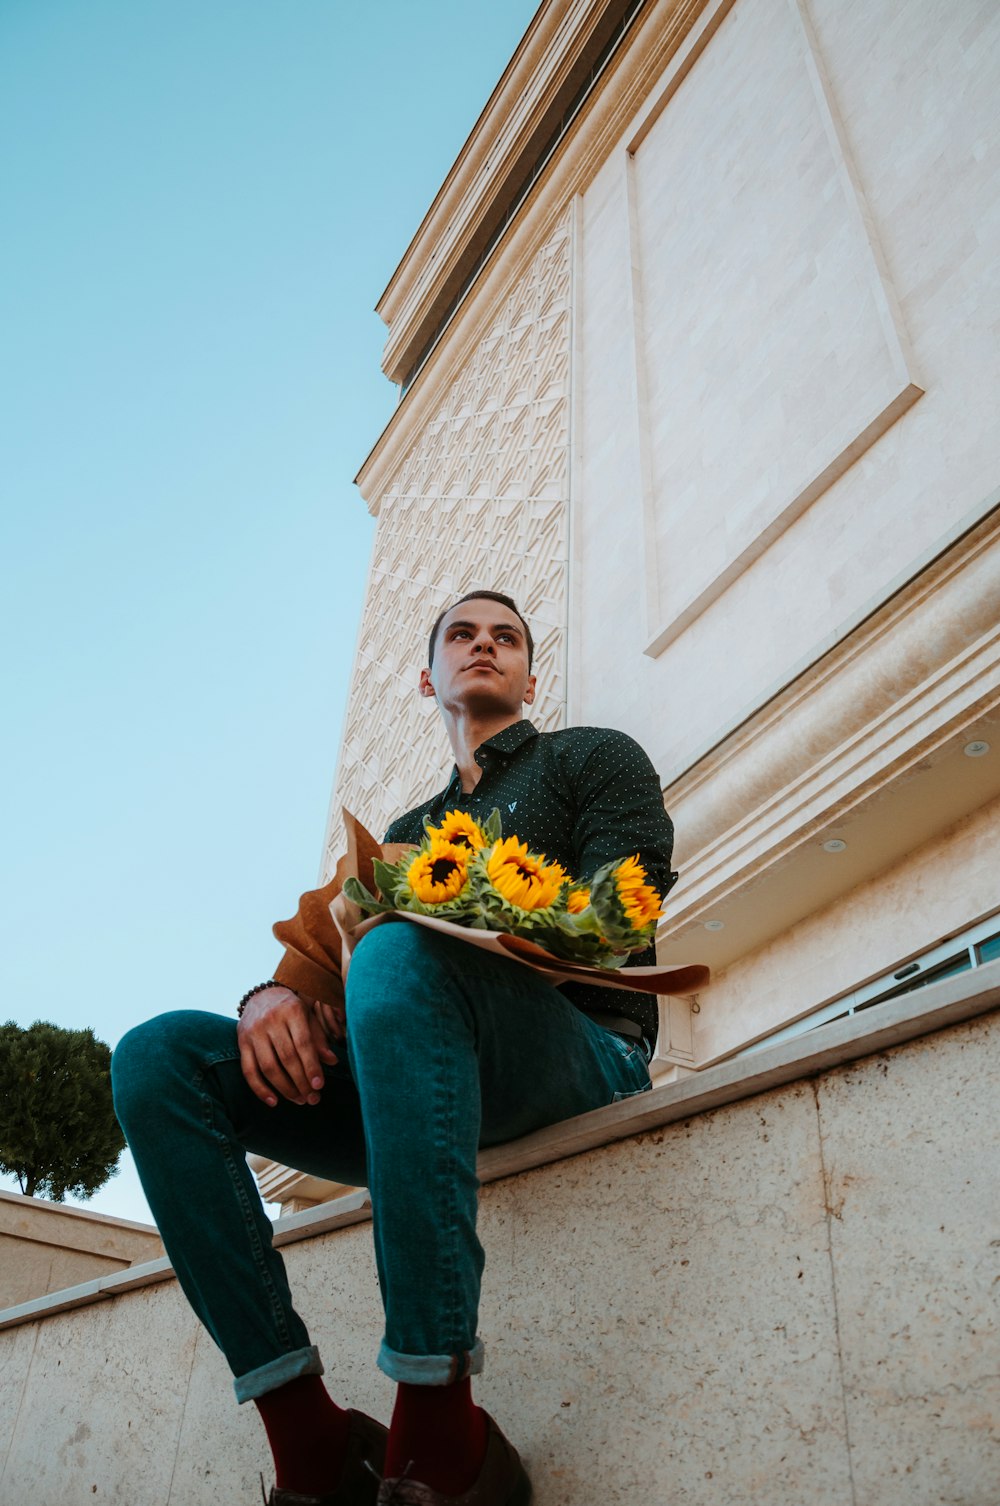 a man sitting on a ledge holding a bouquet of sunflowers